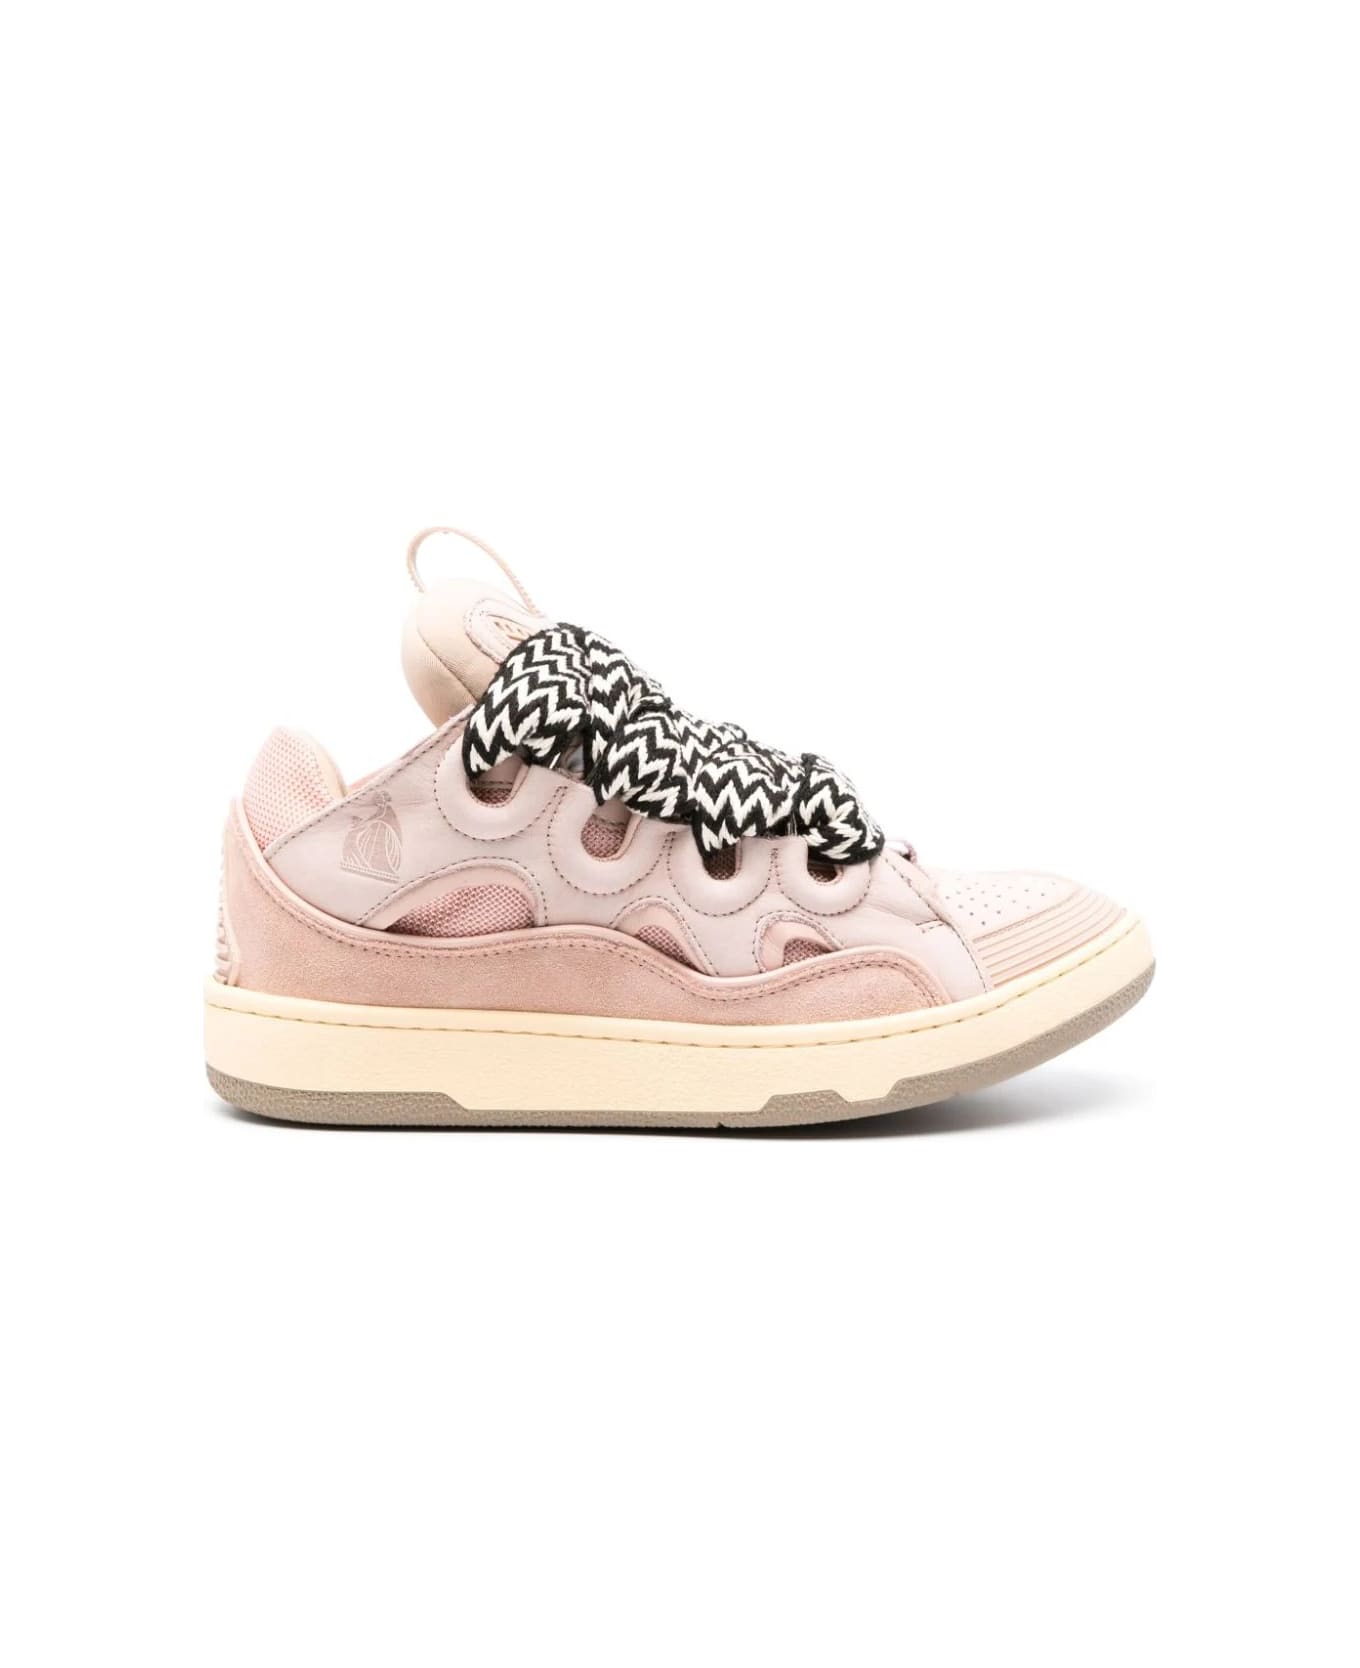 Lanvin Curb Sneakers In Pink Leather - Pink スニーカー